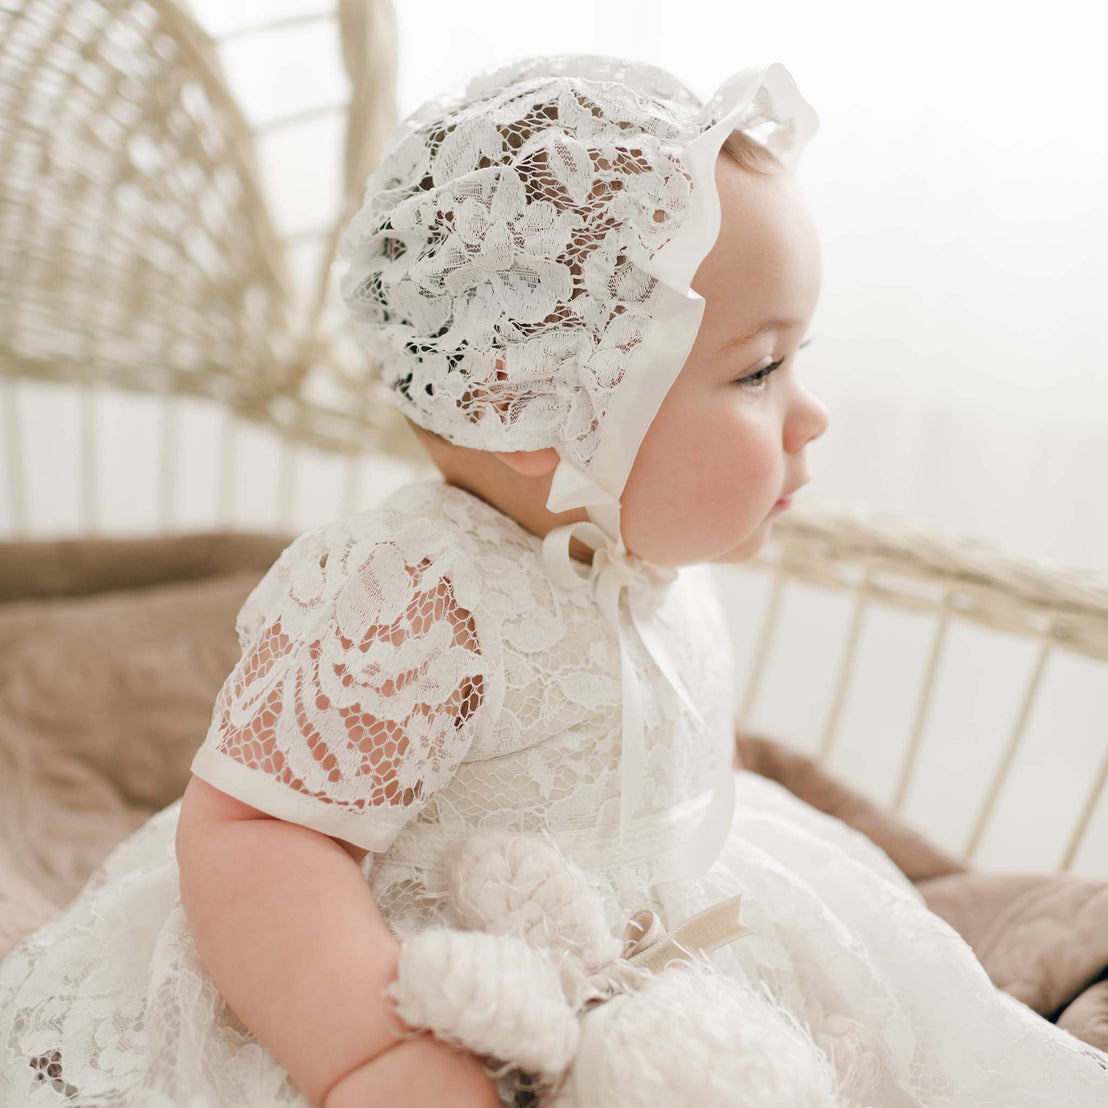 A baby with an ivory lace headband sits in a wicker chair, wearing the Rose Christening Gown & Bonnet, gazing to the side. The background is softly lit, evoking a serene atmosphere